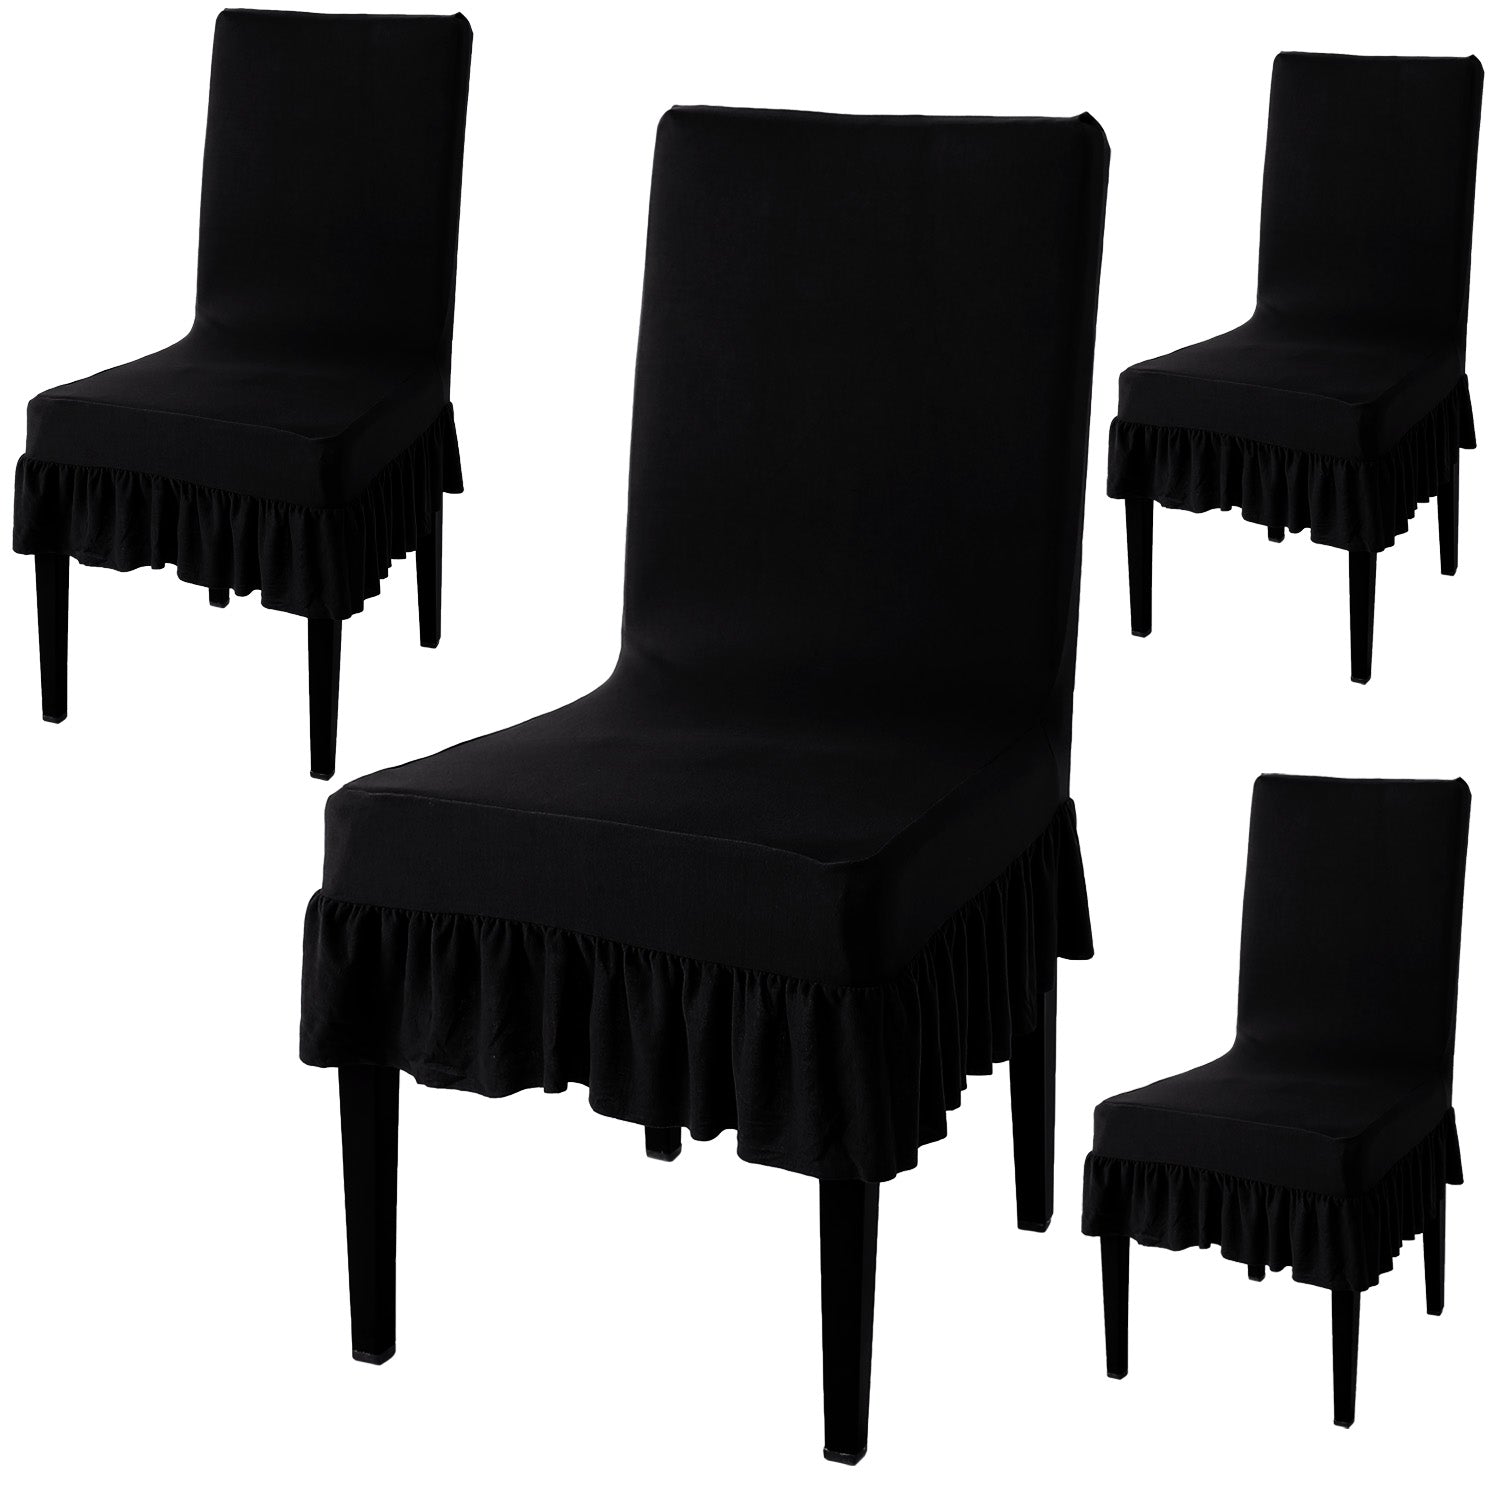 Elastic Stretchable Dining Chair Cover with Frill, Black